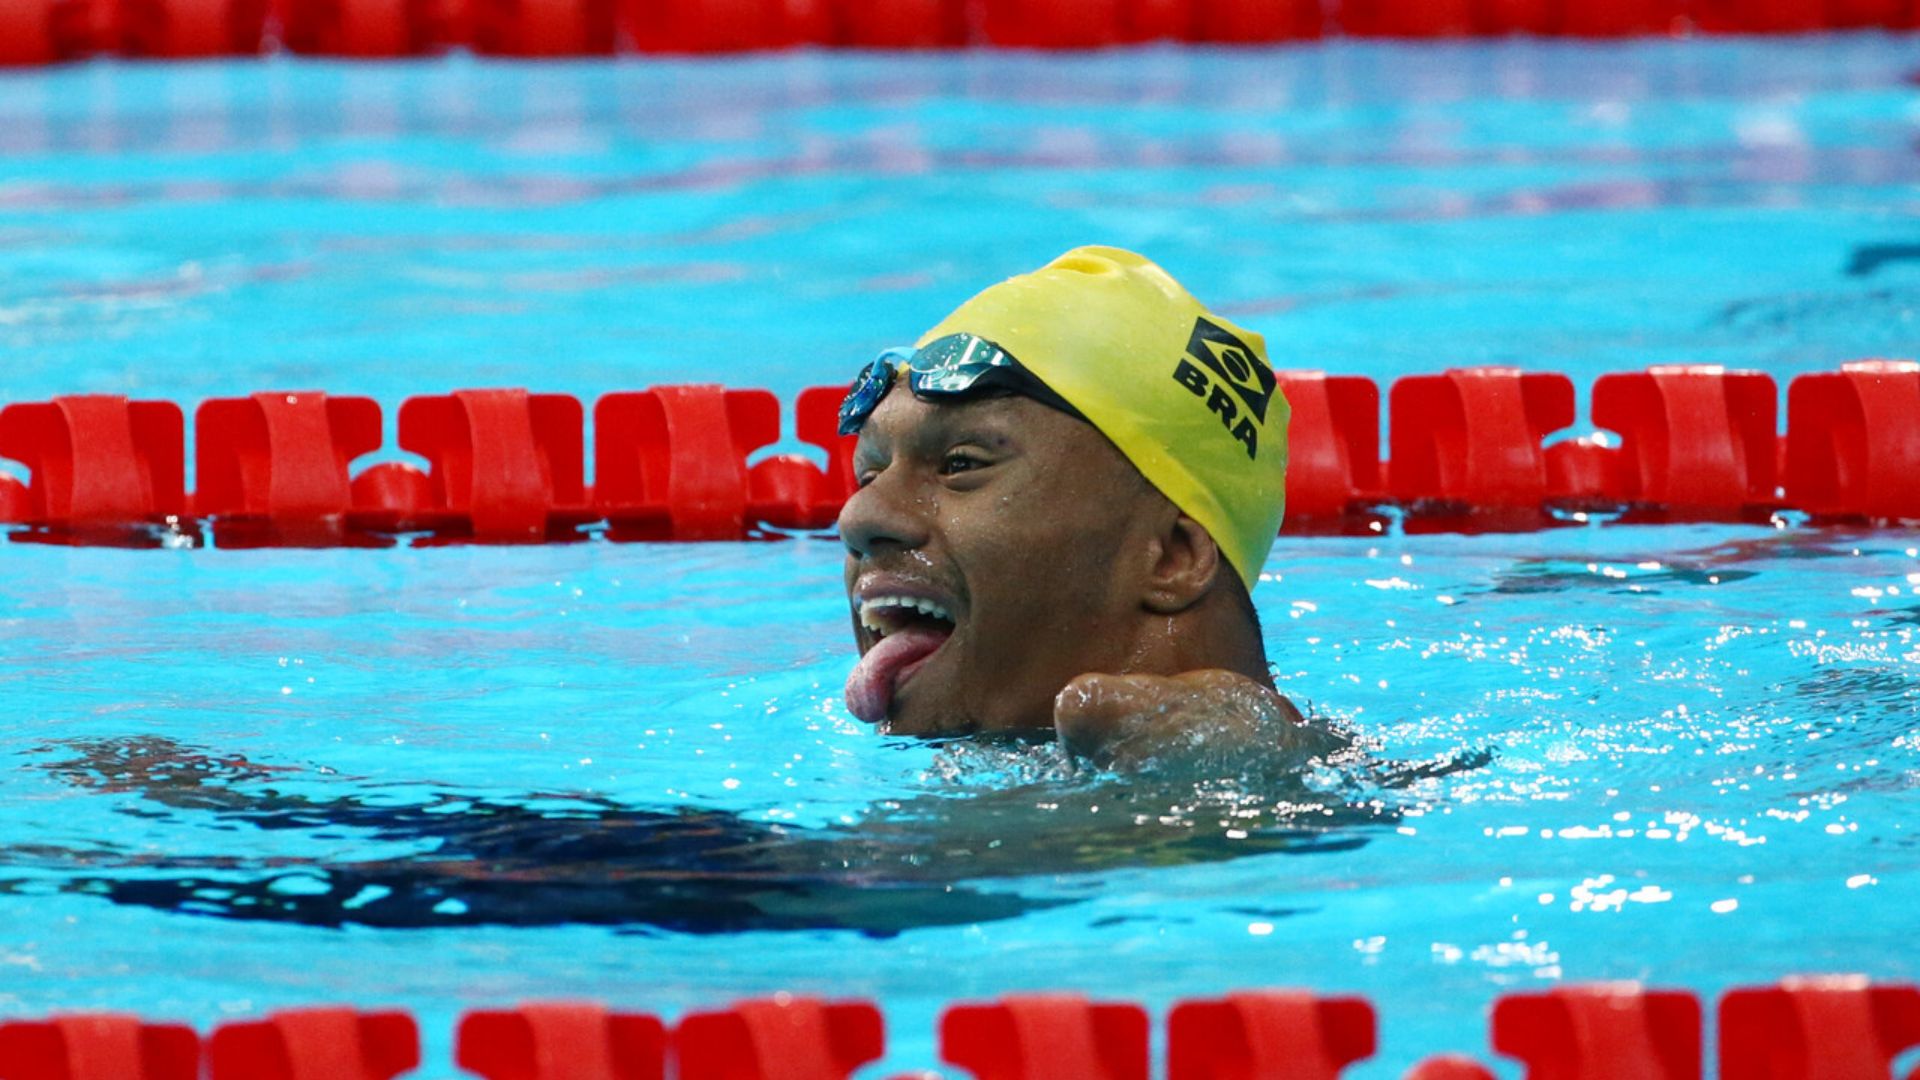 Gabrielzinho Broke a New Record, and Abarza Adds Another Silver Medal